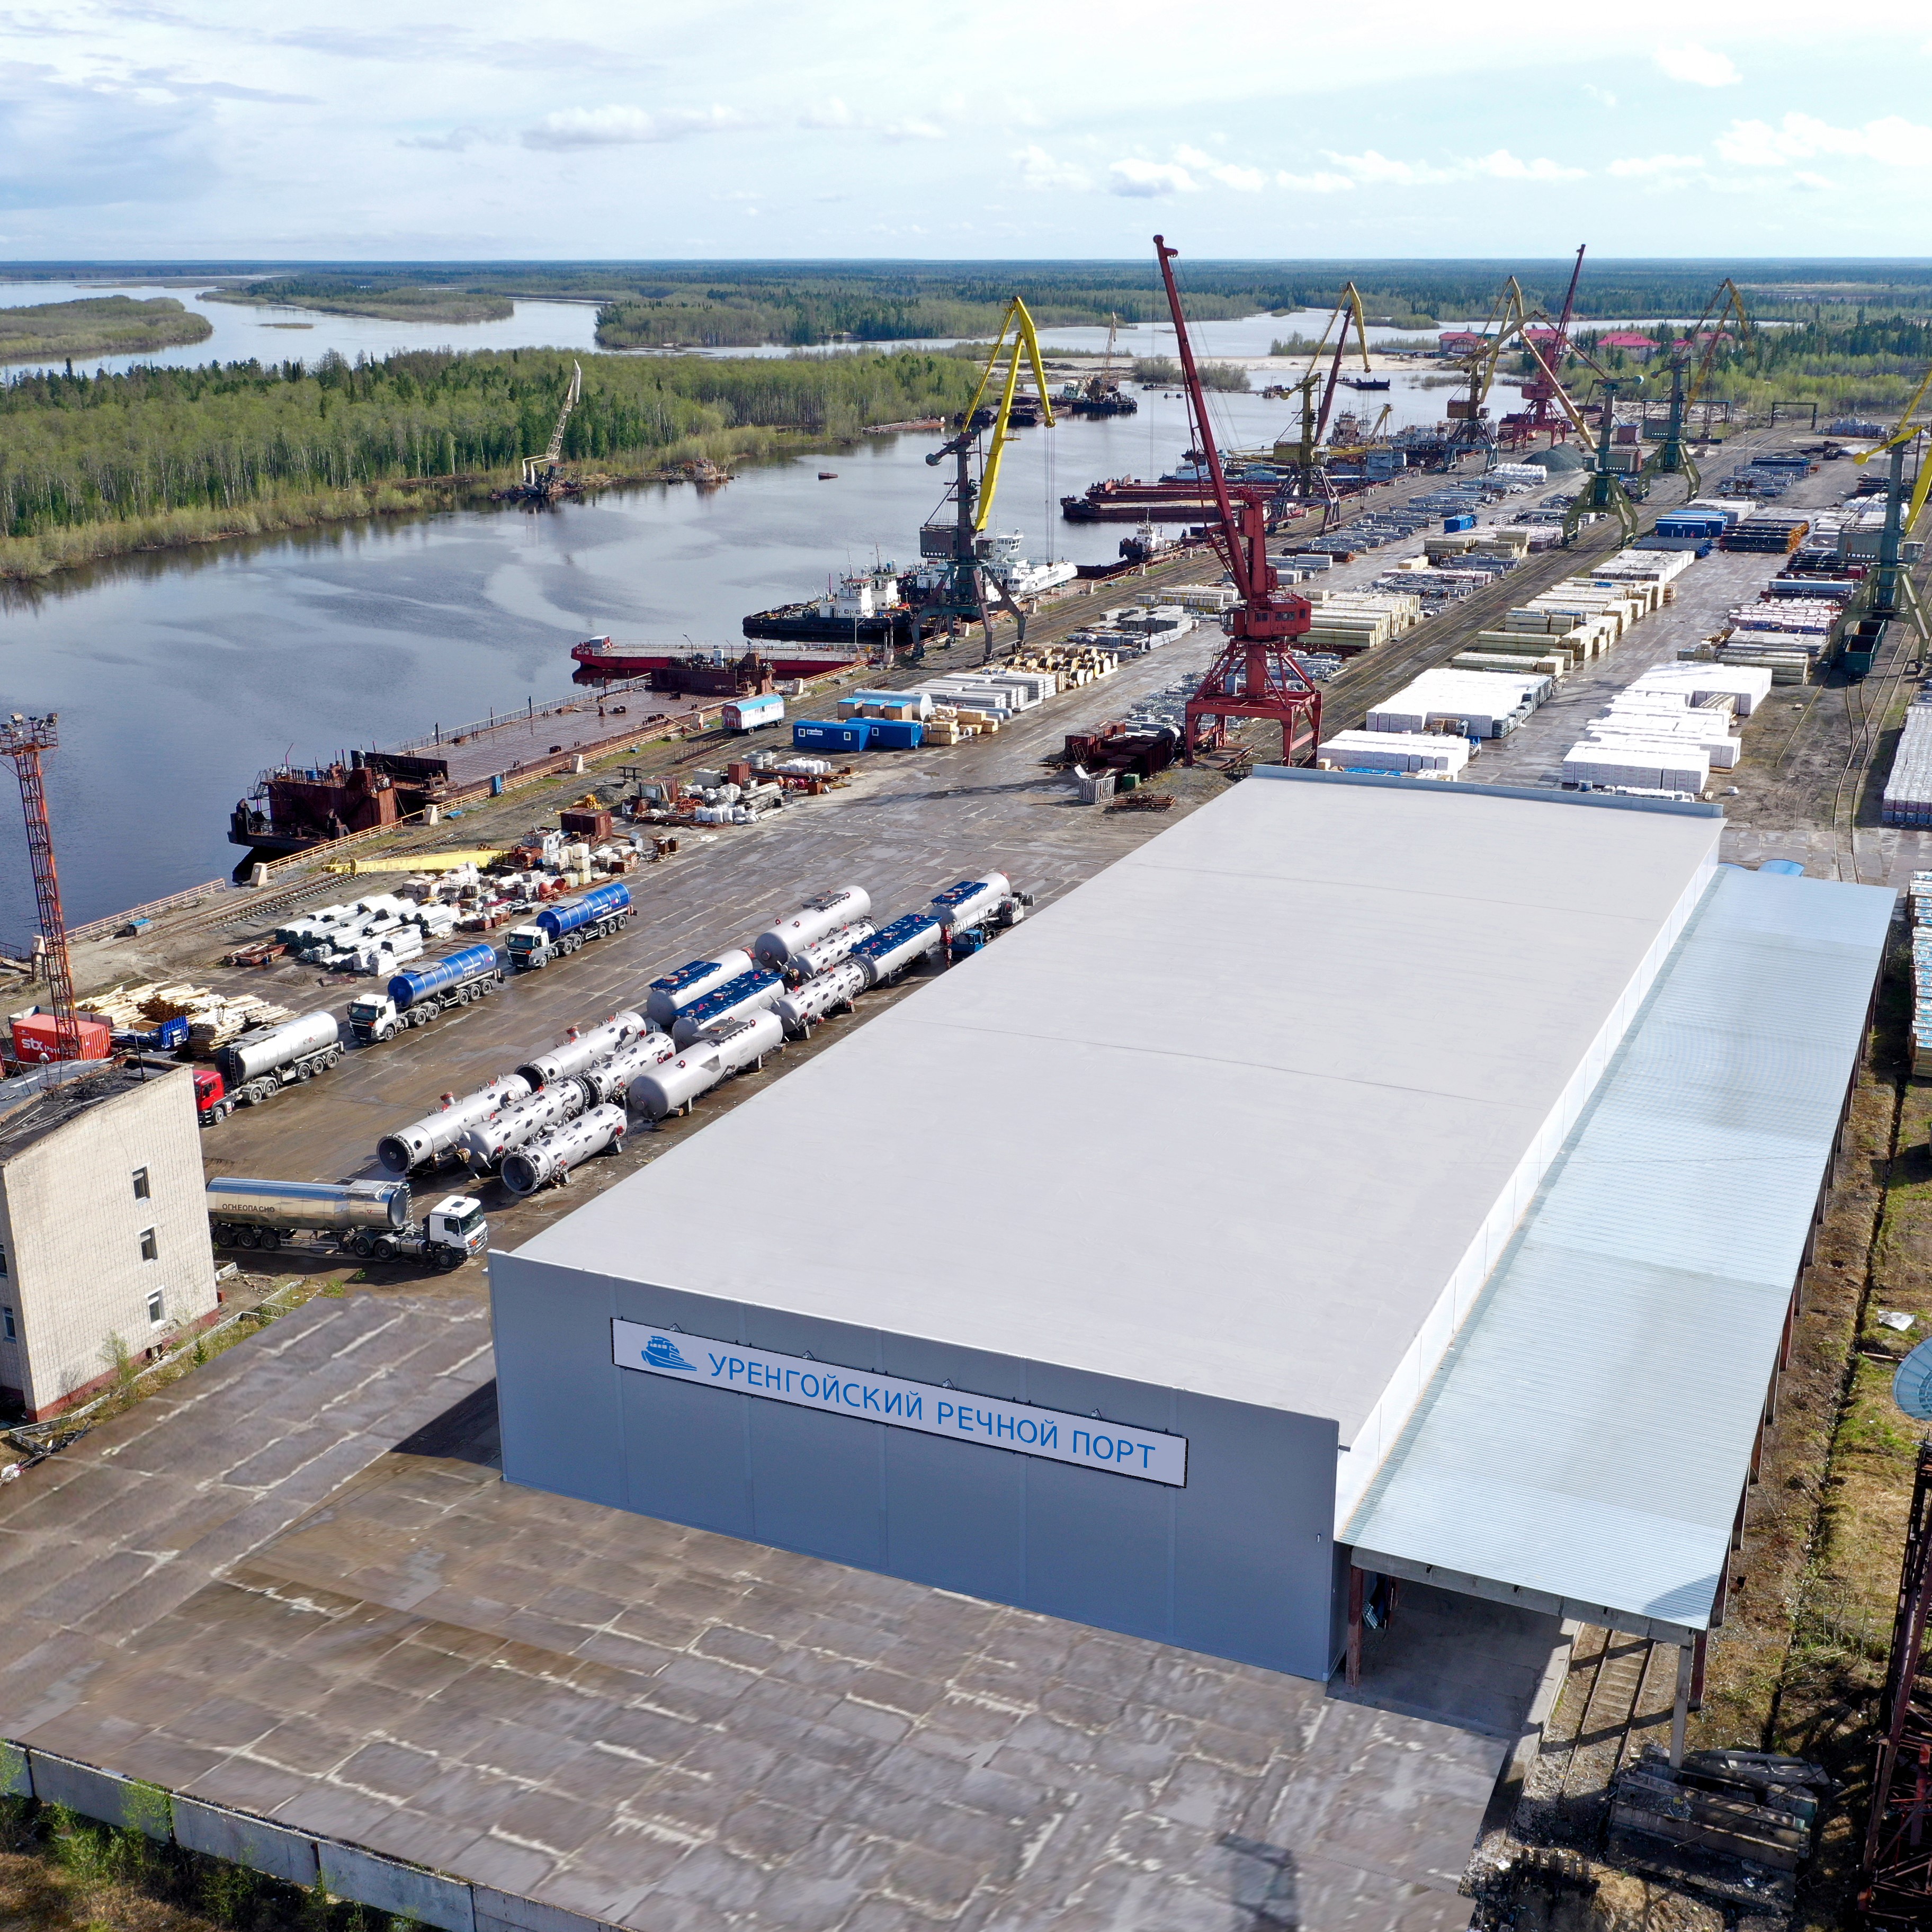 Reconstruction of a warm warehouse for goods and materials for the Urengoy river port.